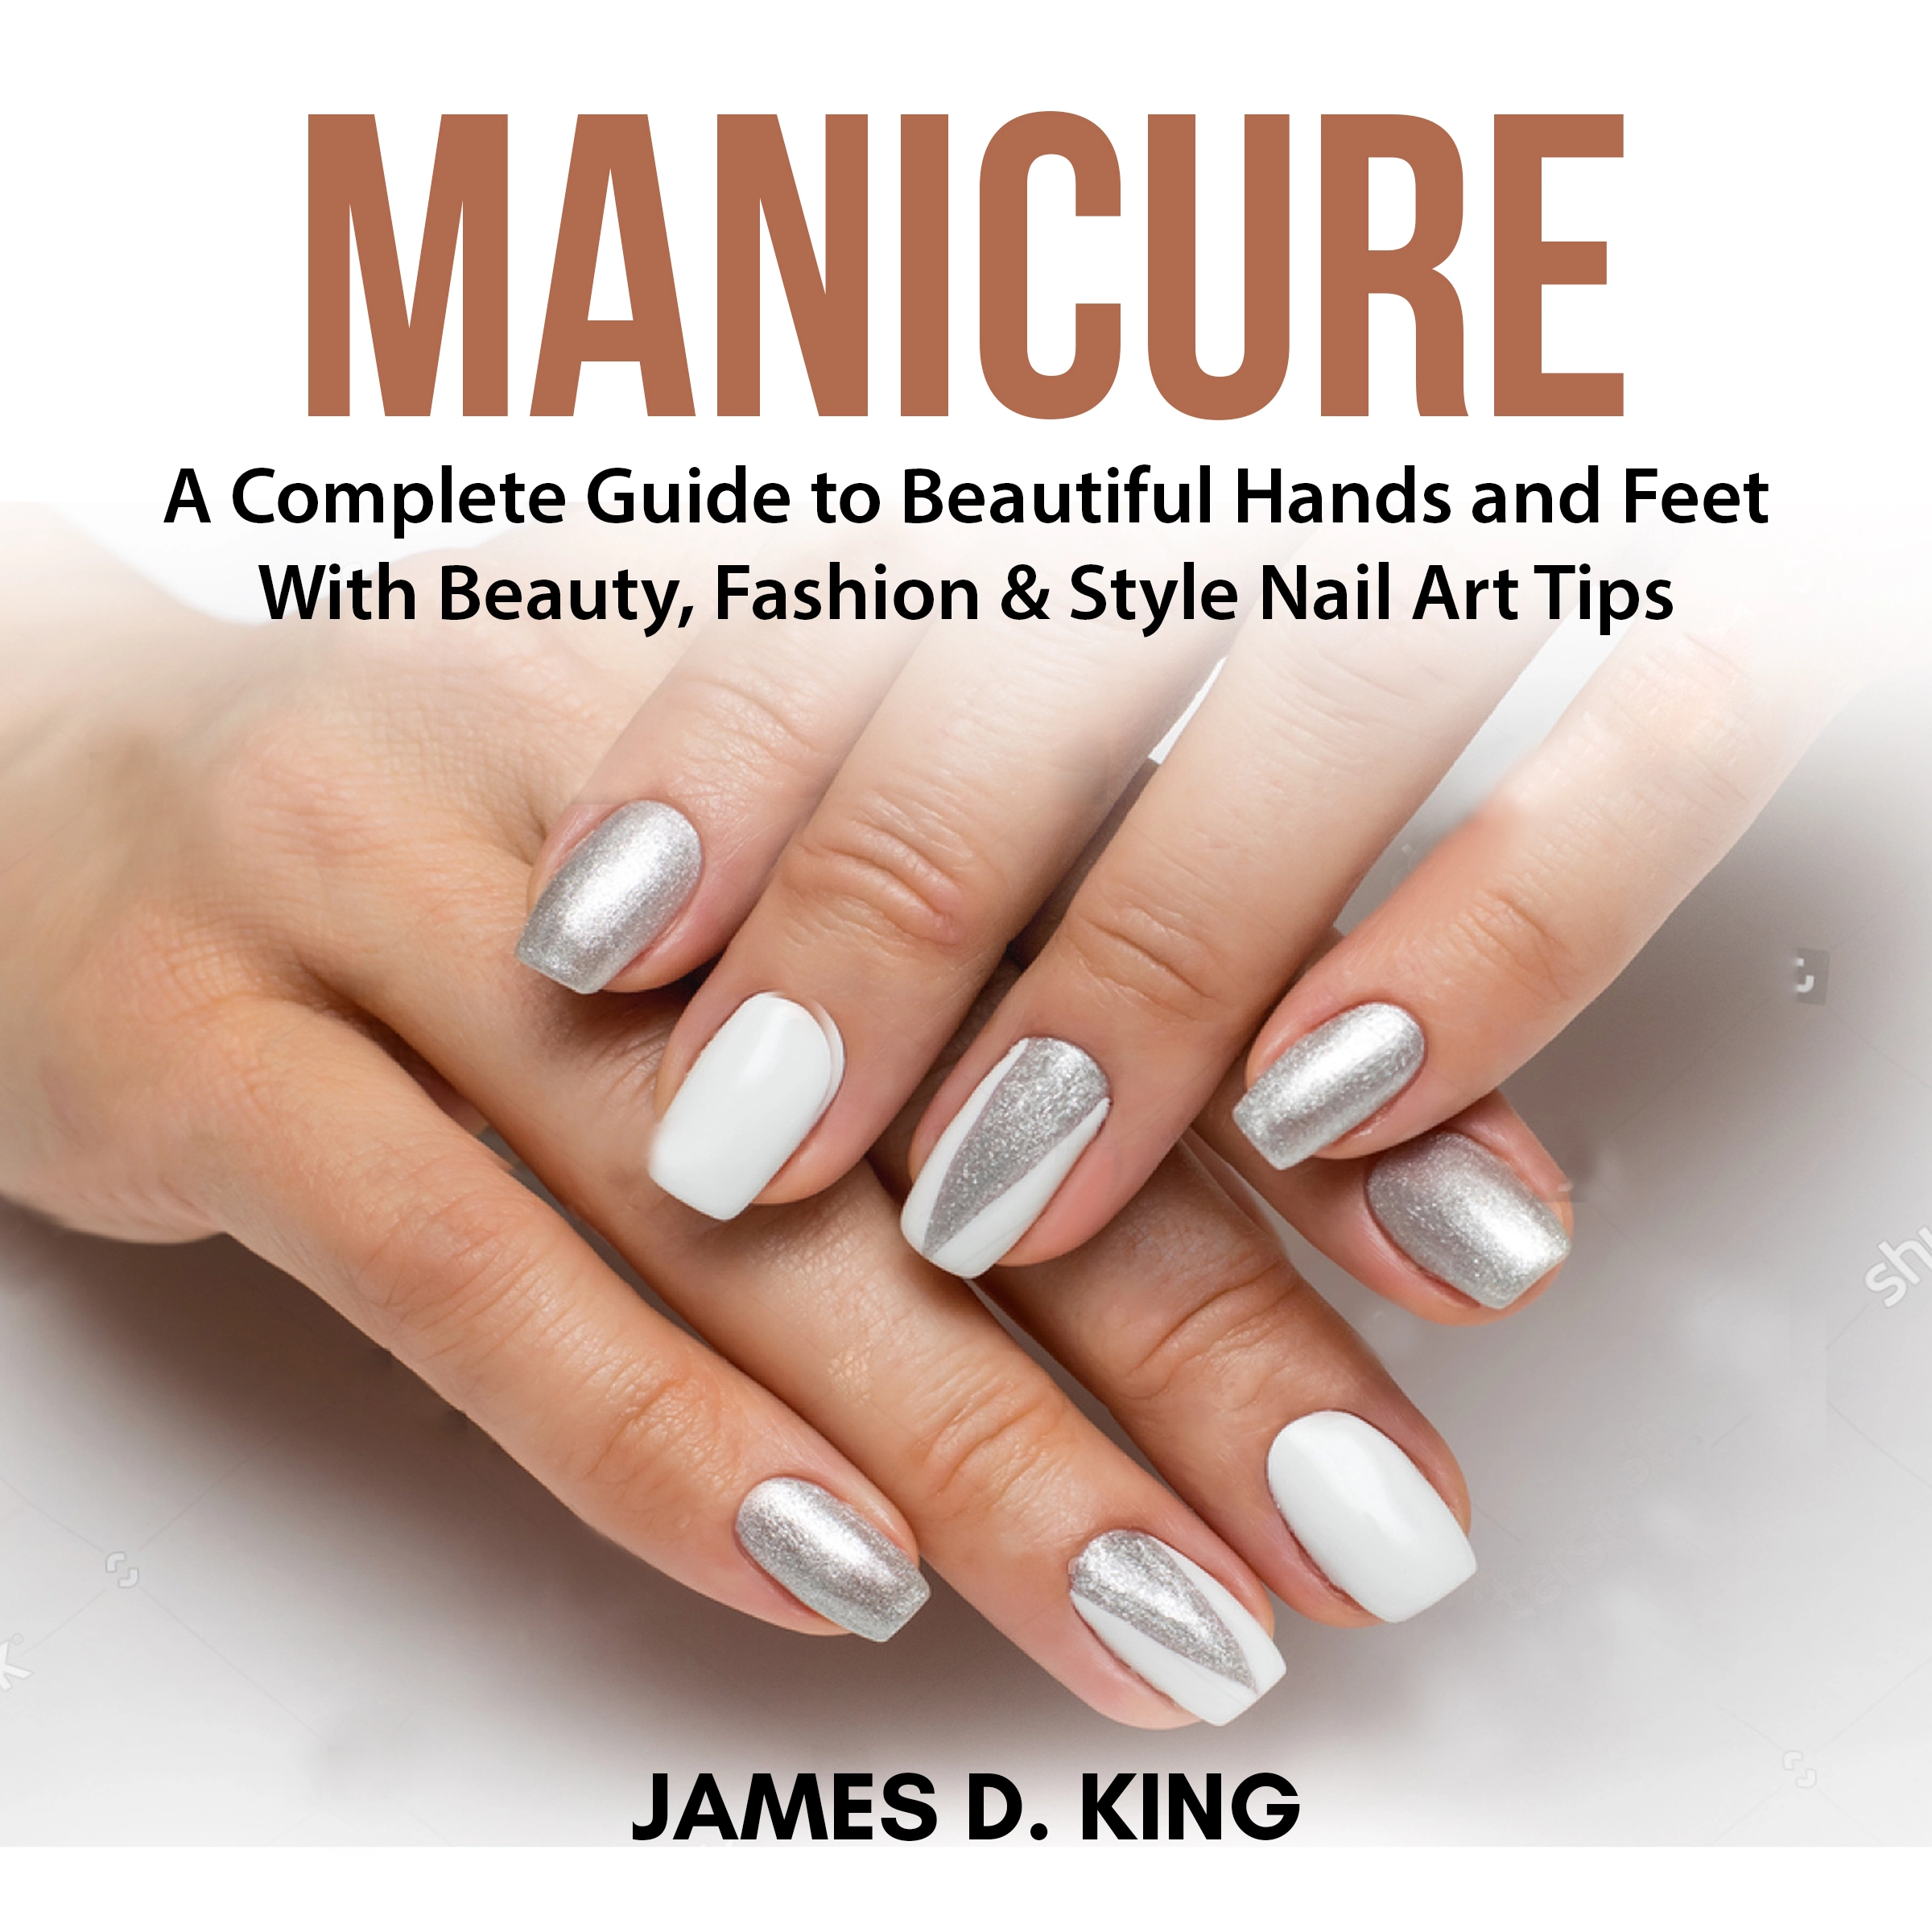 Manicure: A Complete Guide to Beautiful Hands and Feet With Beauty, Fashion & Style Nail Art Tips Audiobook by James D. King